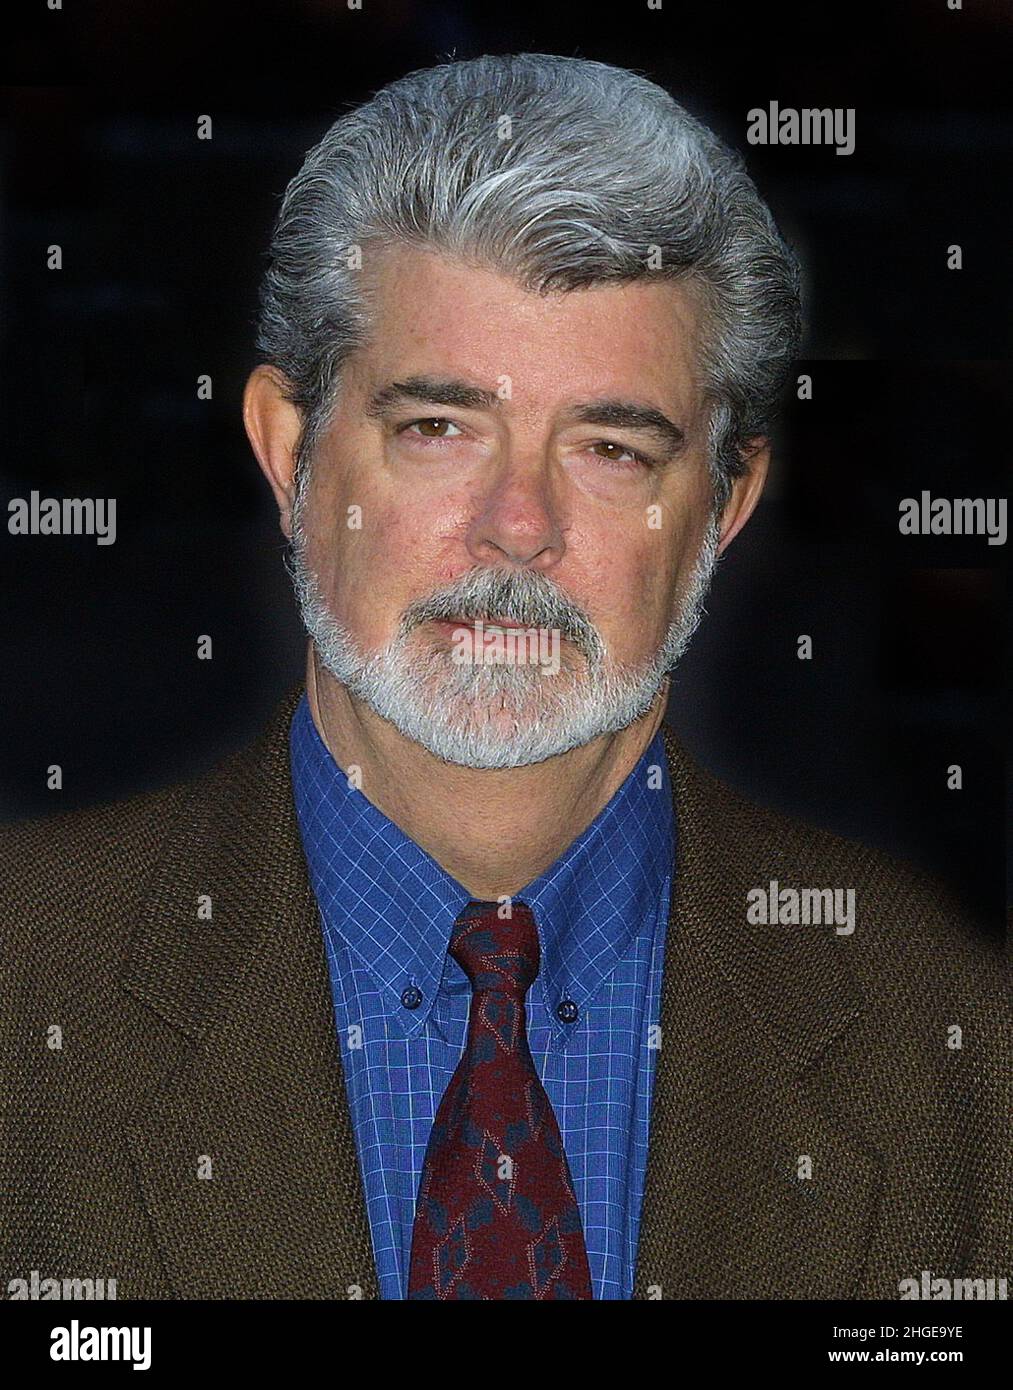 Film director George Lucas at the Star Wars premiere in London 14th May 2002. Stock Photo